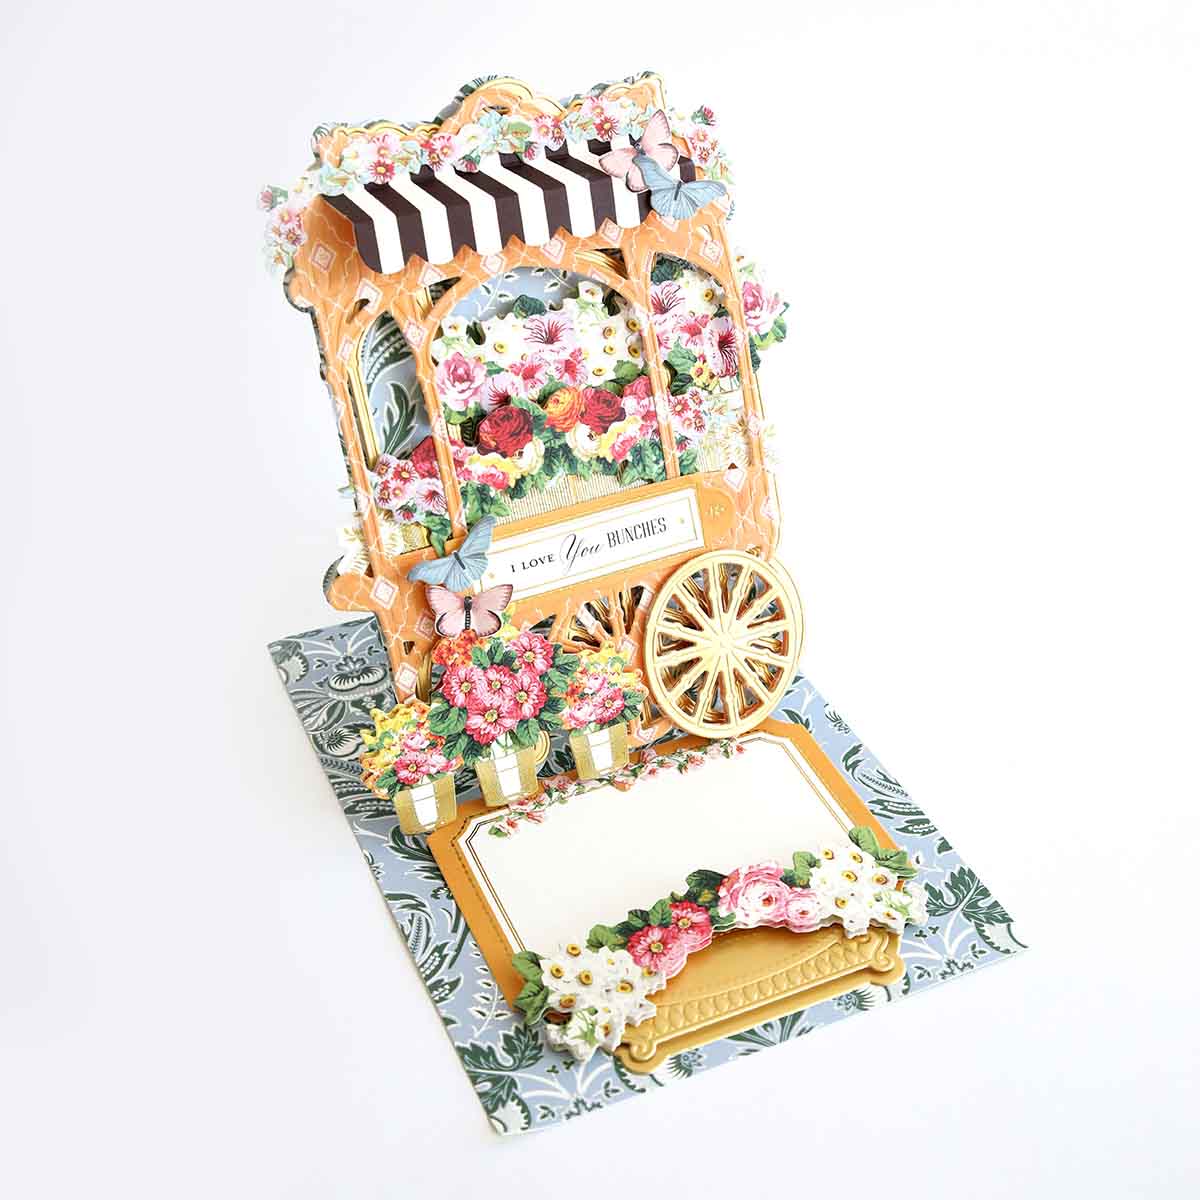 a close up of a card with a horse drawn carriage.